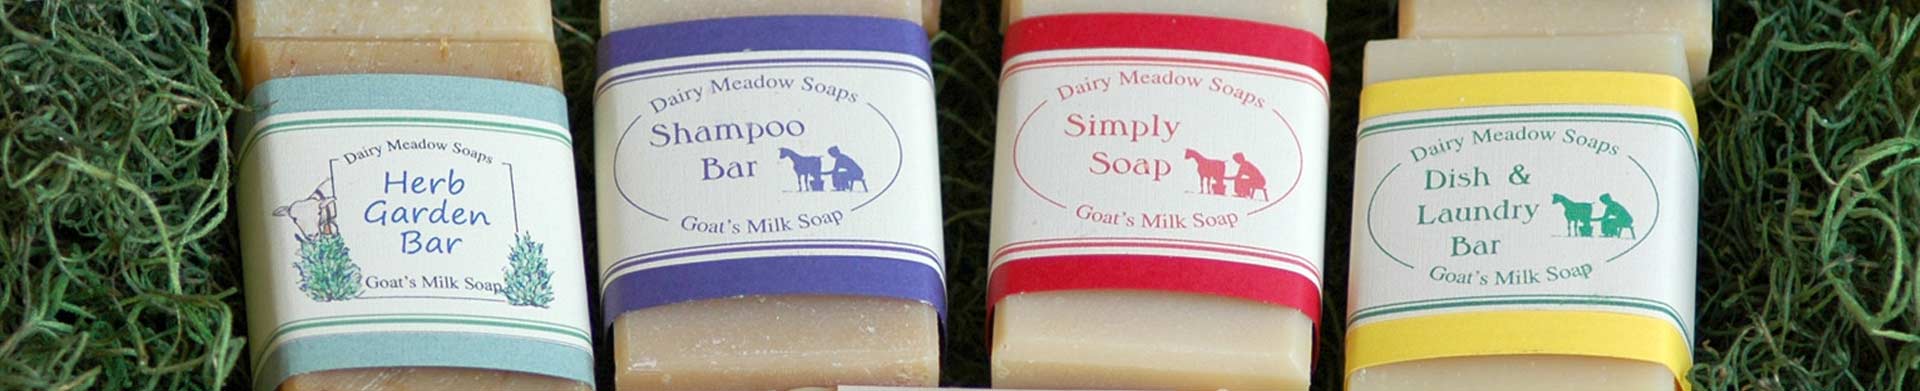 Dairy Meadow Soaps Products